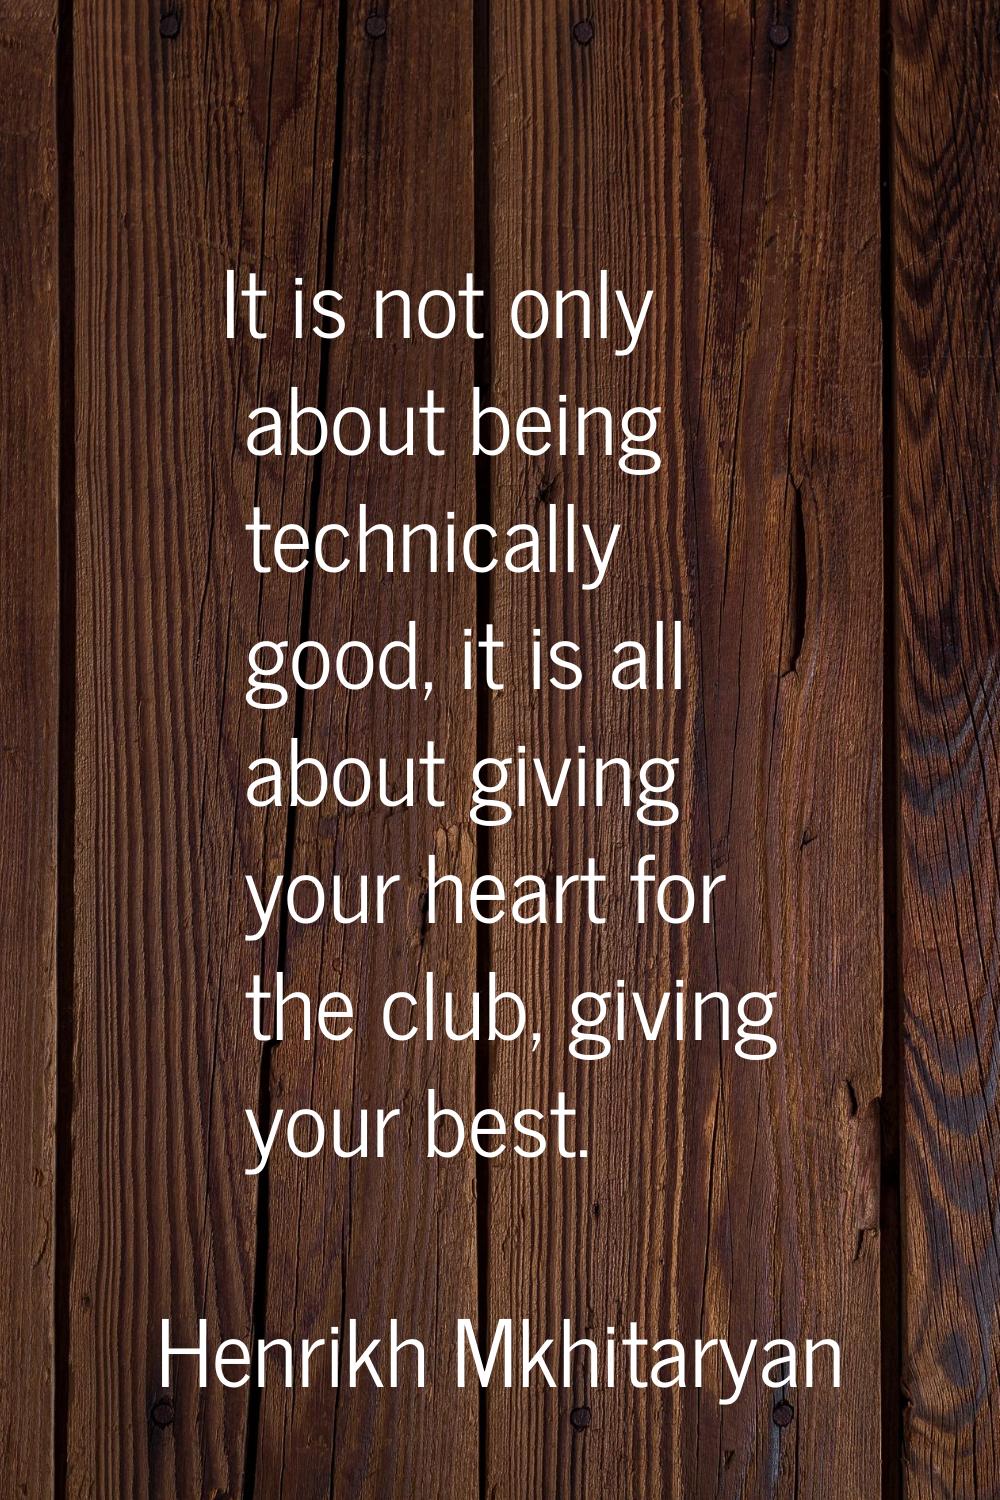 It is not only about being technically good, it is all about giving your heart for the club, giving